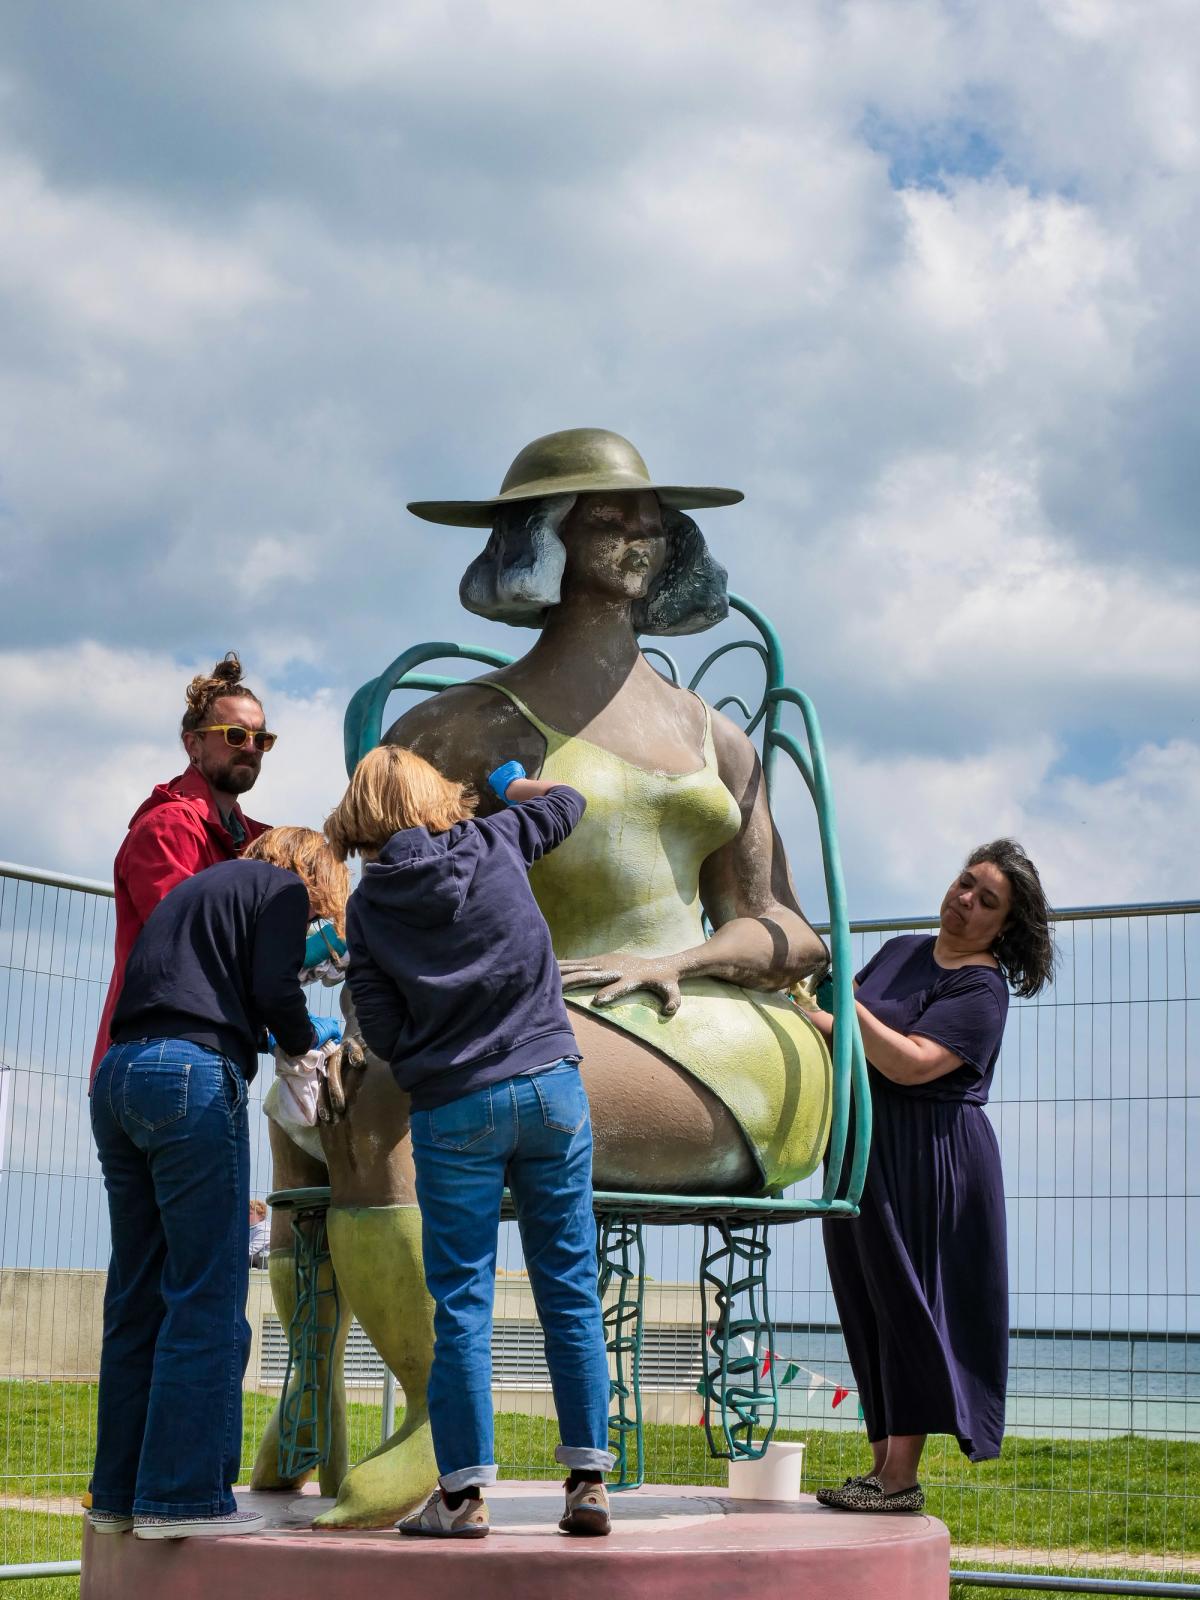 Volunteers cleaning up the defaced sculpture in Bexhill, England

© Lineker Photography / @lineker_photography